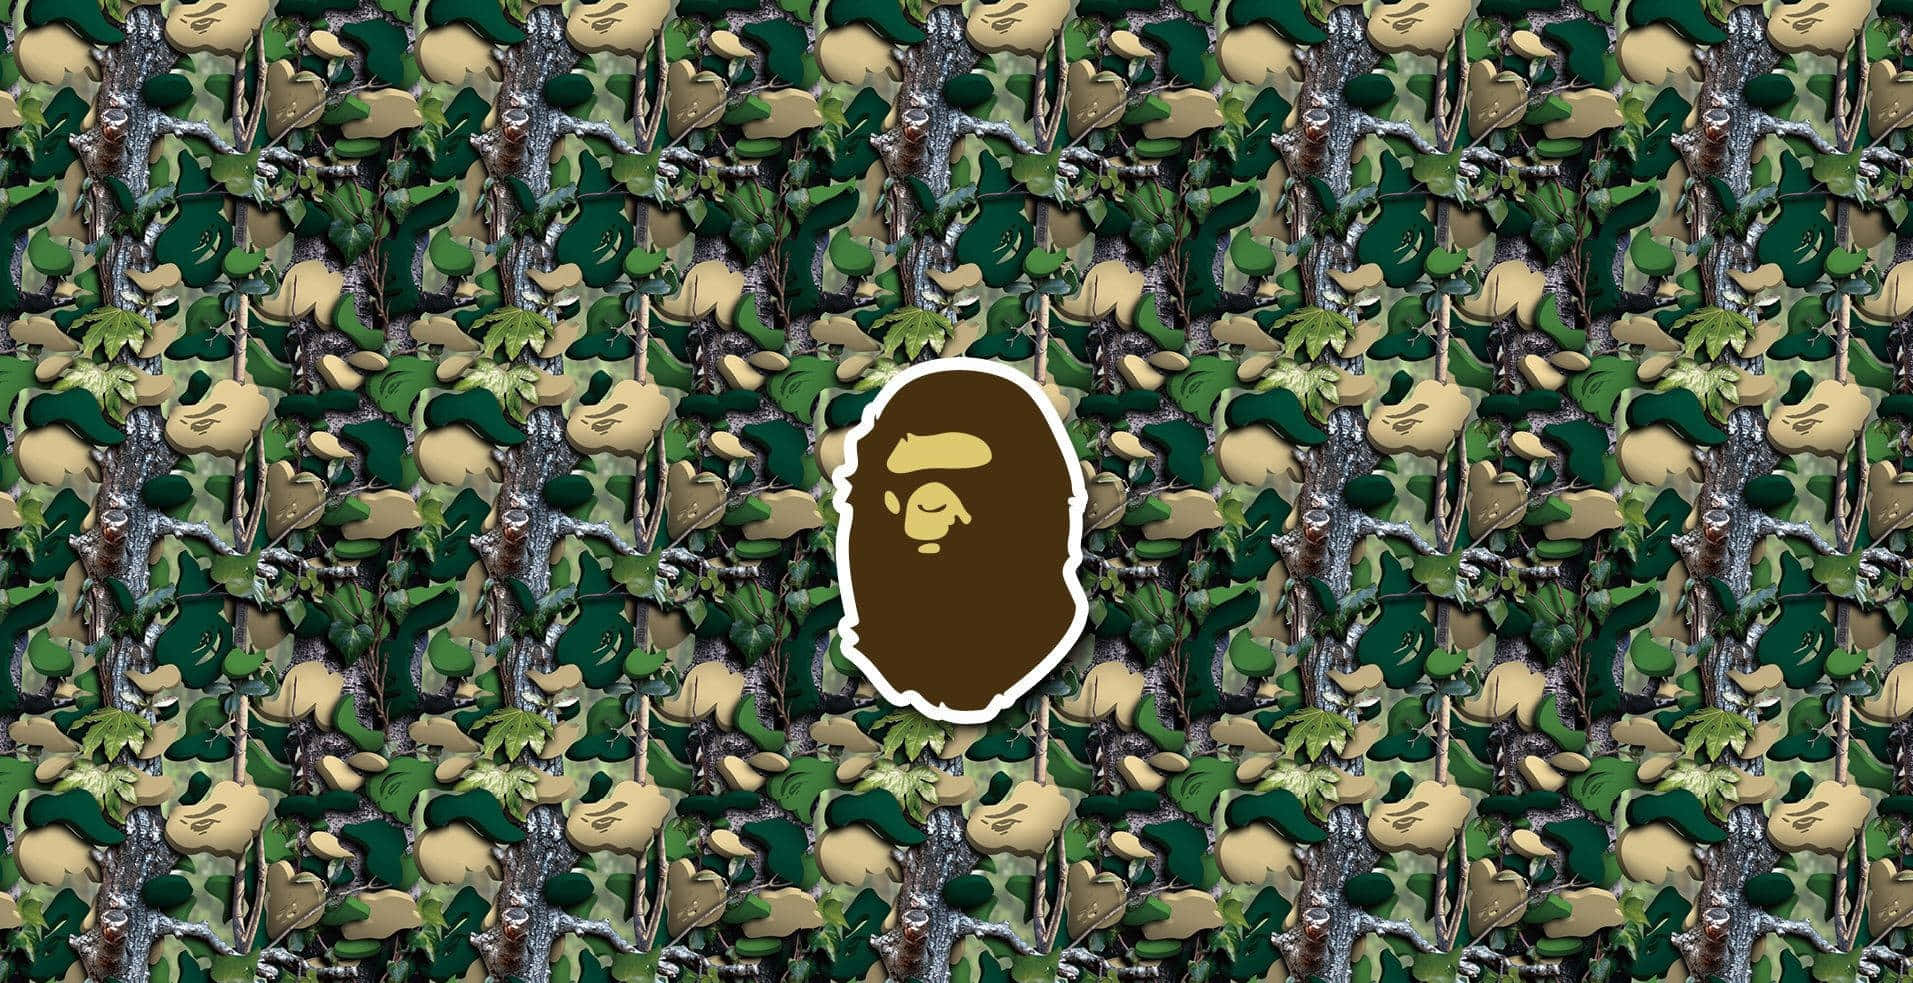 "Let your style stand out from the crowd with BAPE"